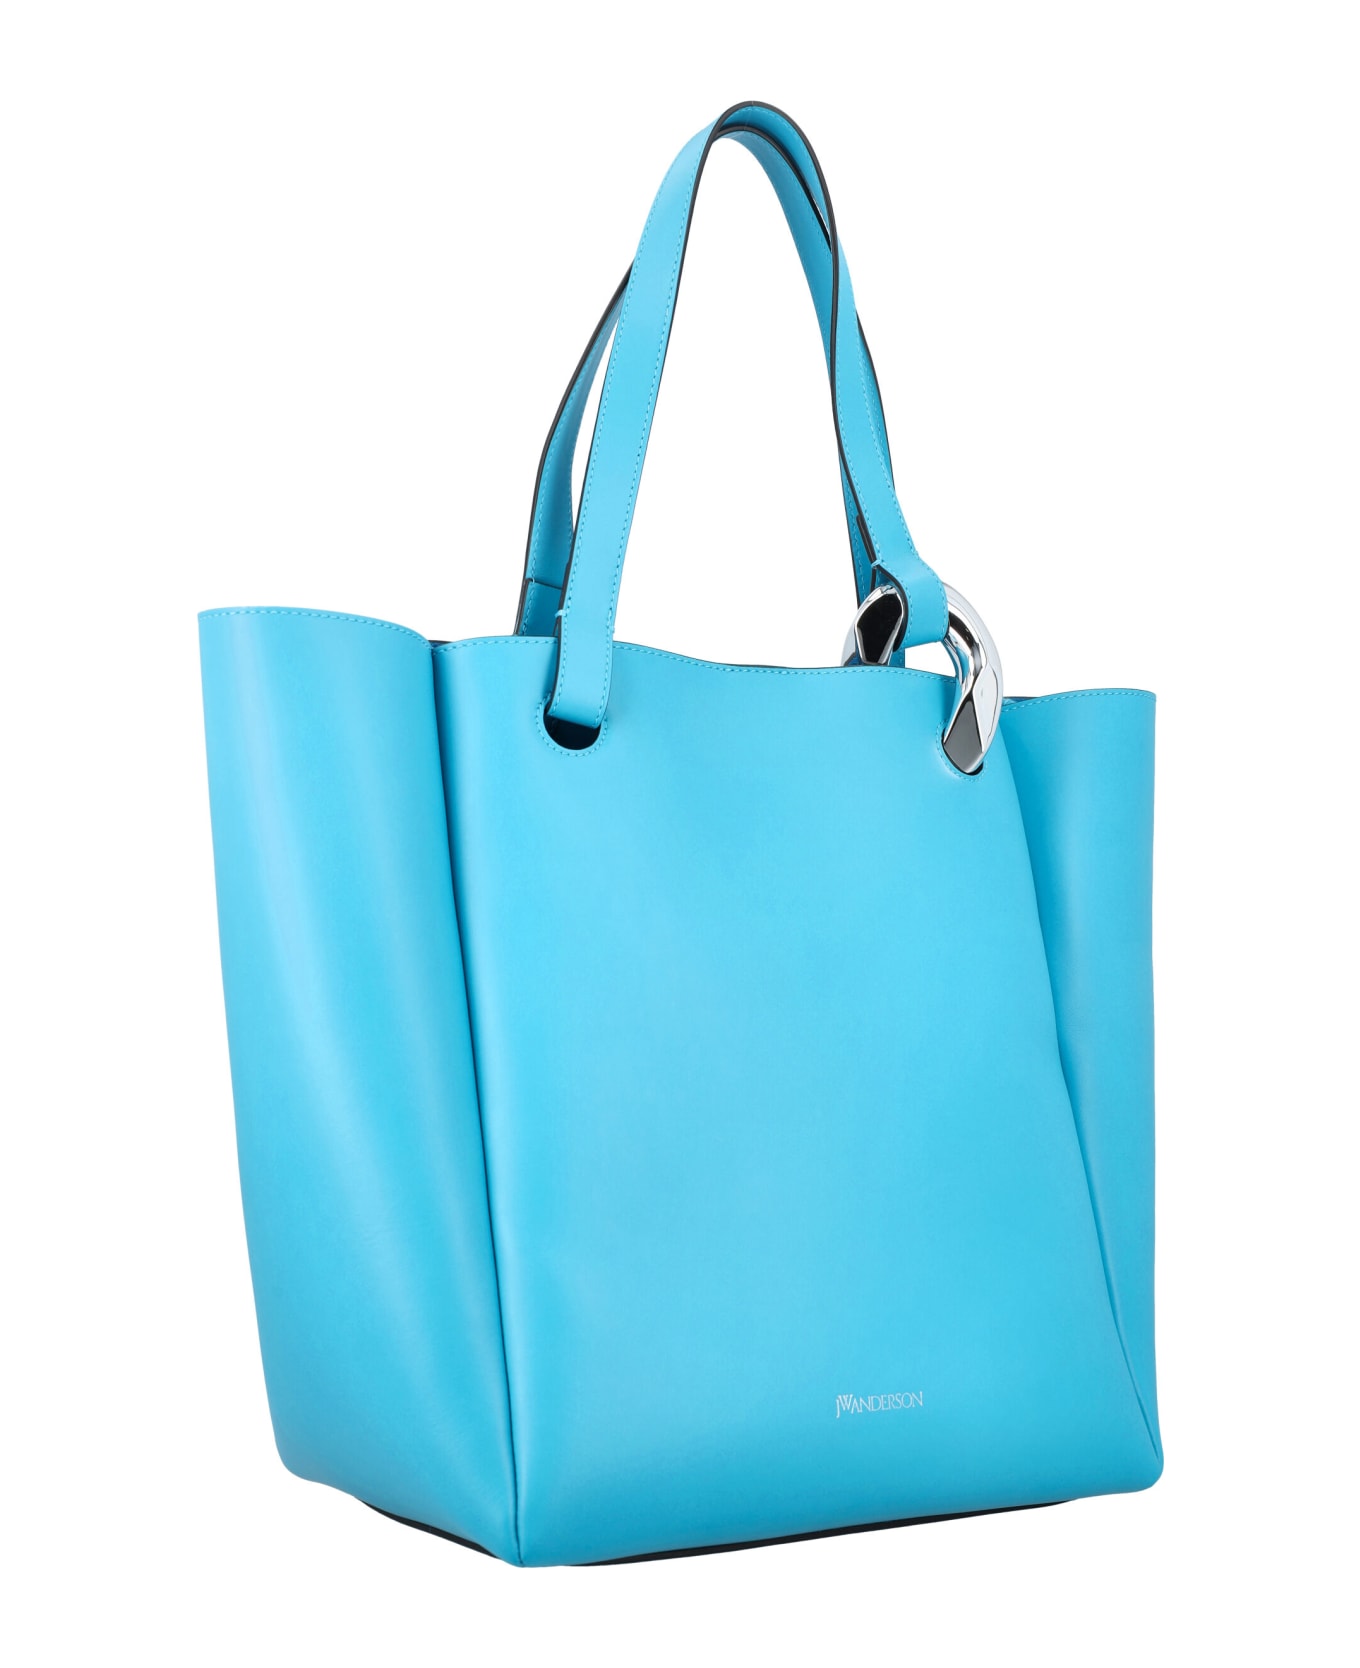 J.W. Anderson Chain Cabs Tote Bag - LIGHT BLUE トートバッグ